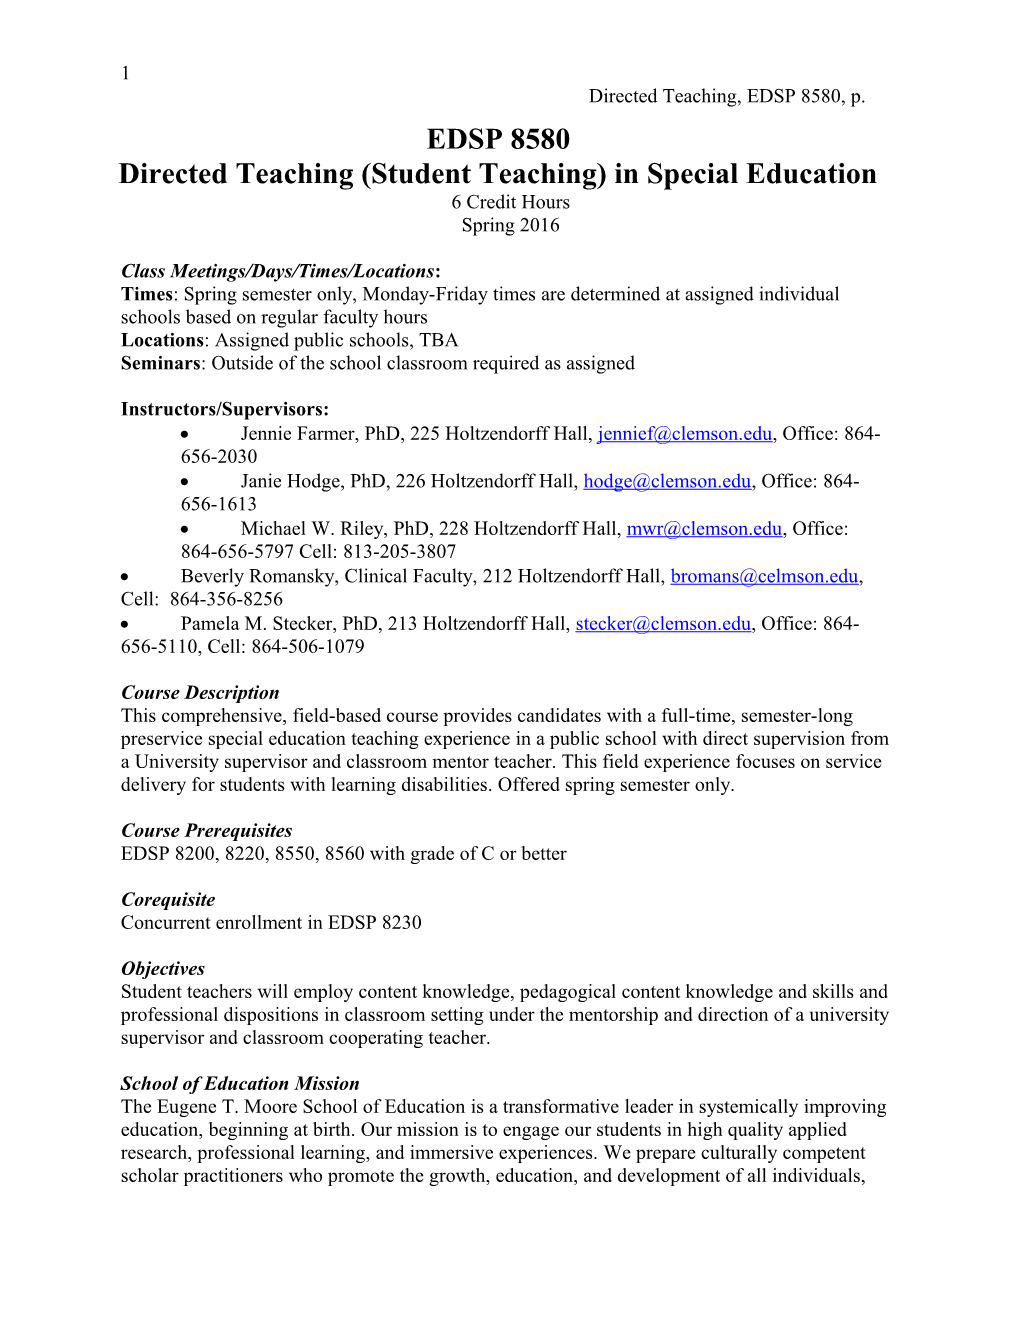 Directed Teaching (Student Teaching) in Special Education